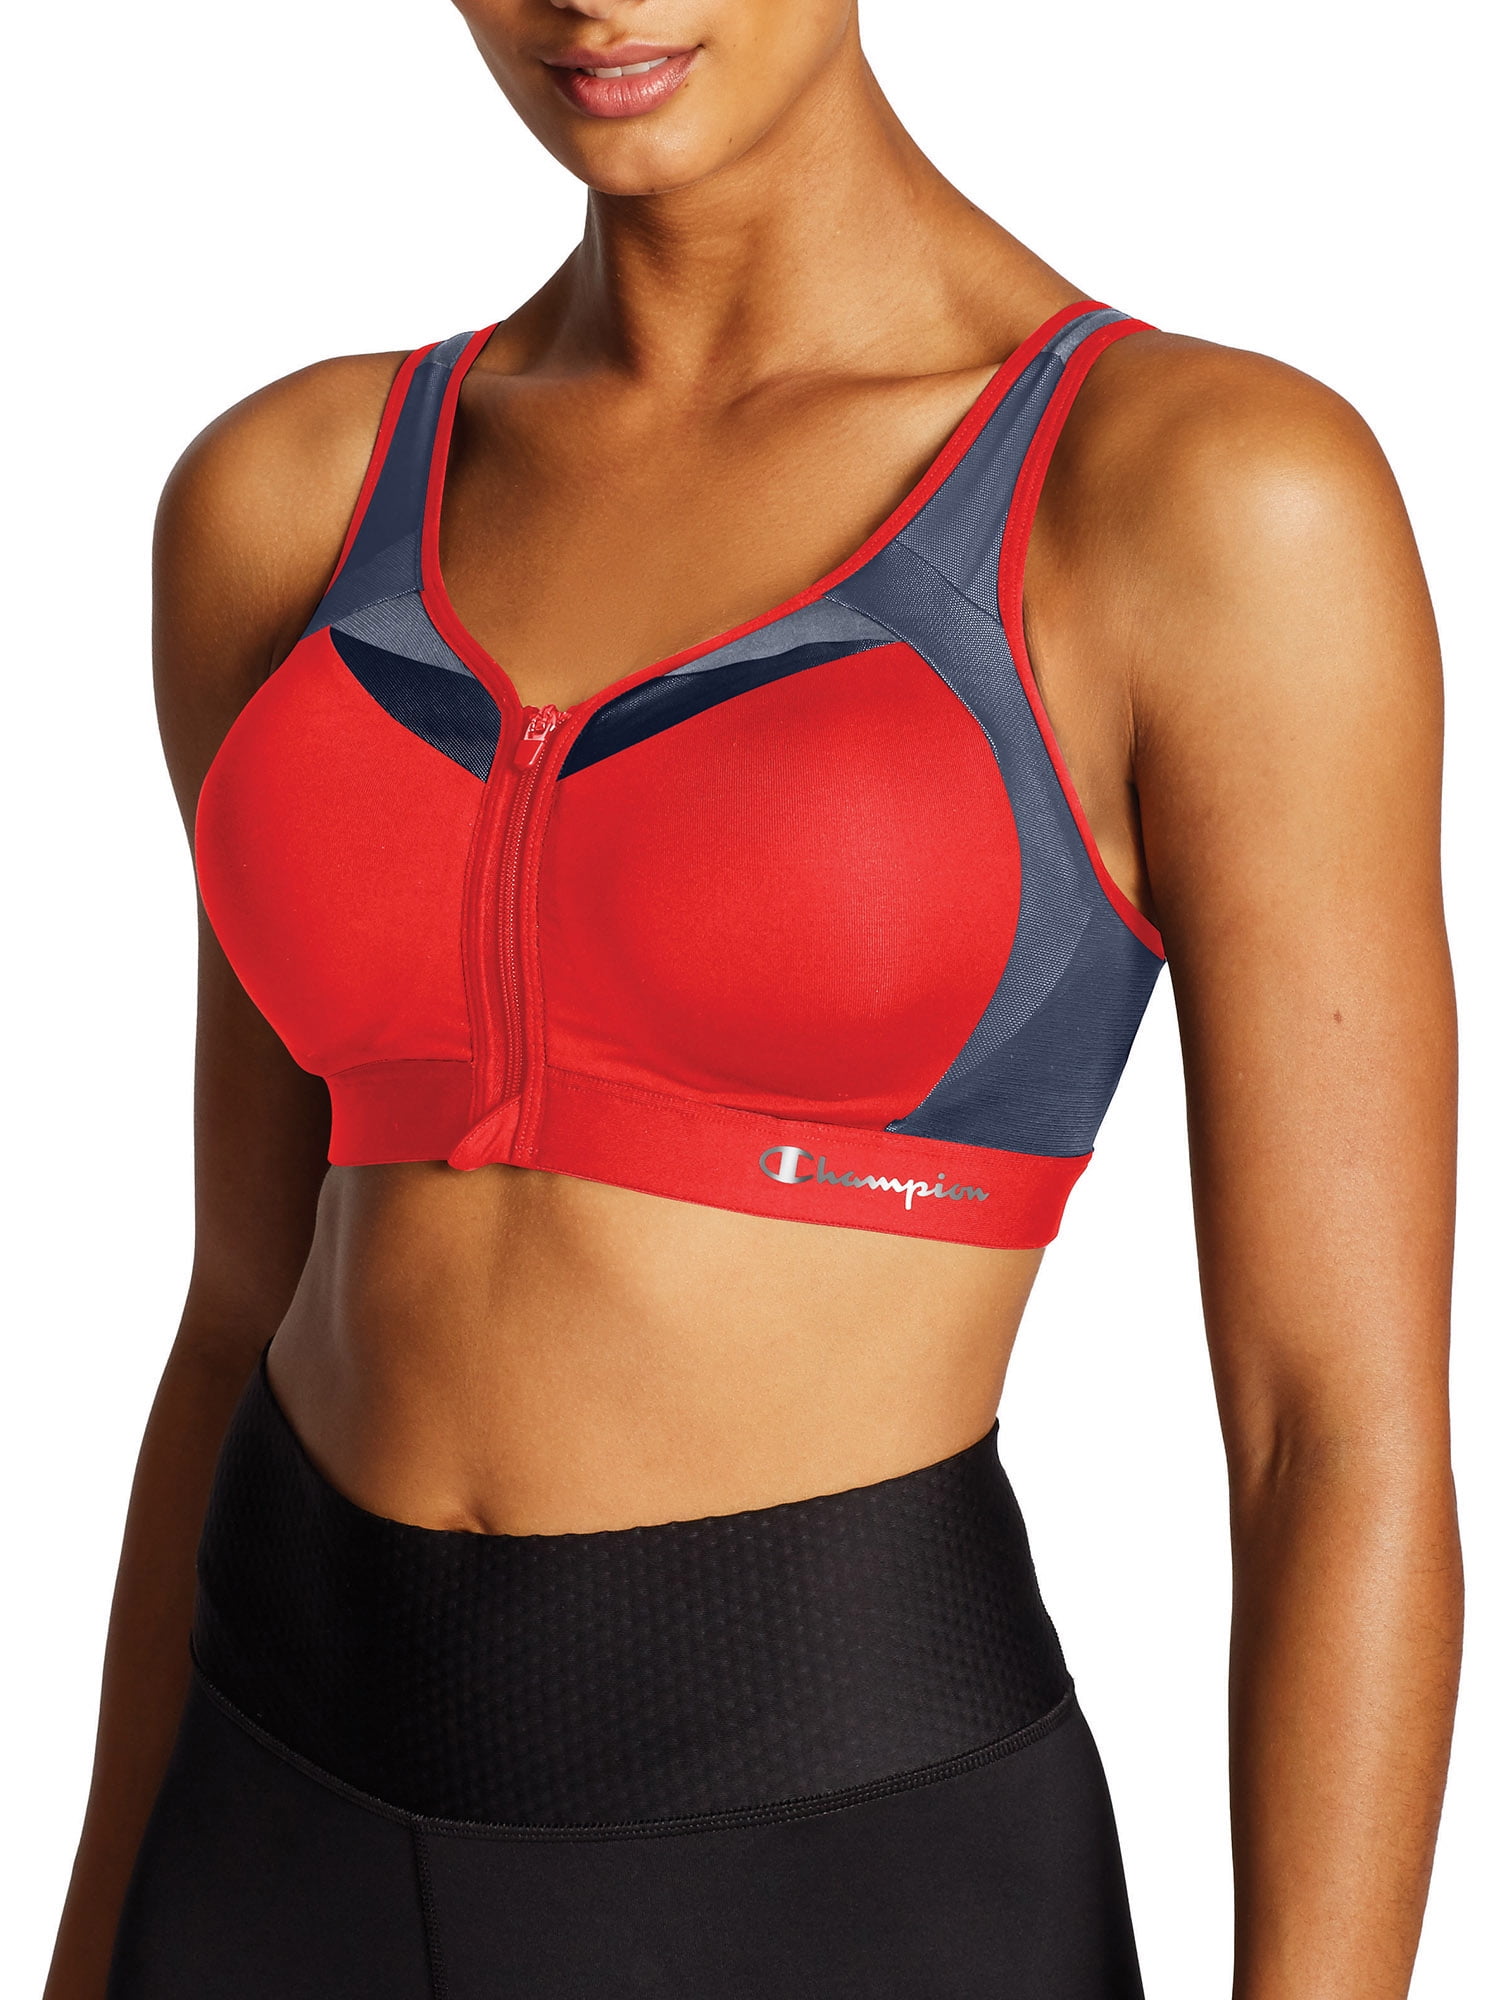 Women's Champion Motion Control Zip Front Sports Bra Red Flame 42DD 